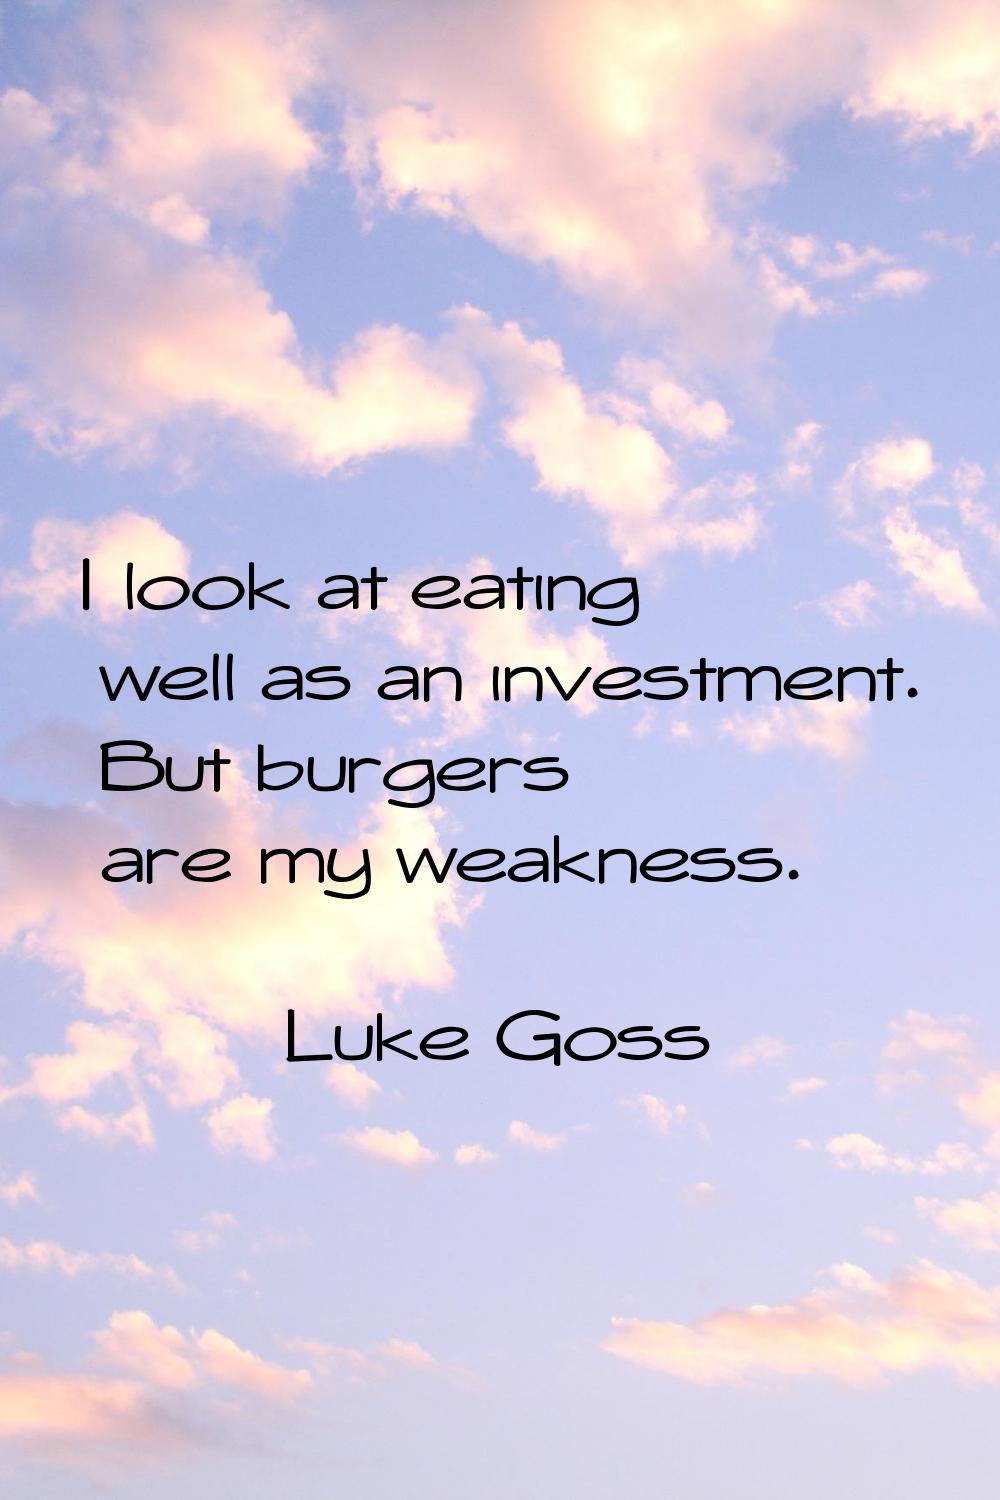 I look at eating well as an investment. But burgers are my weakness.